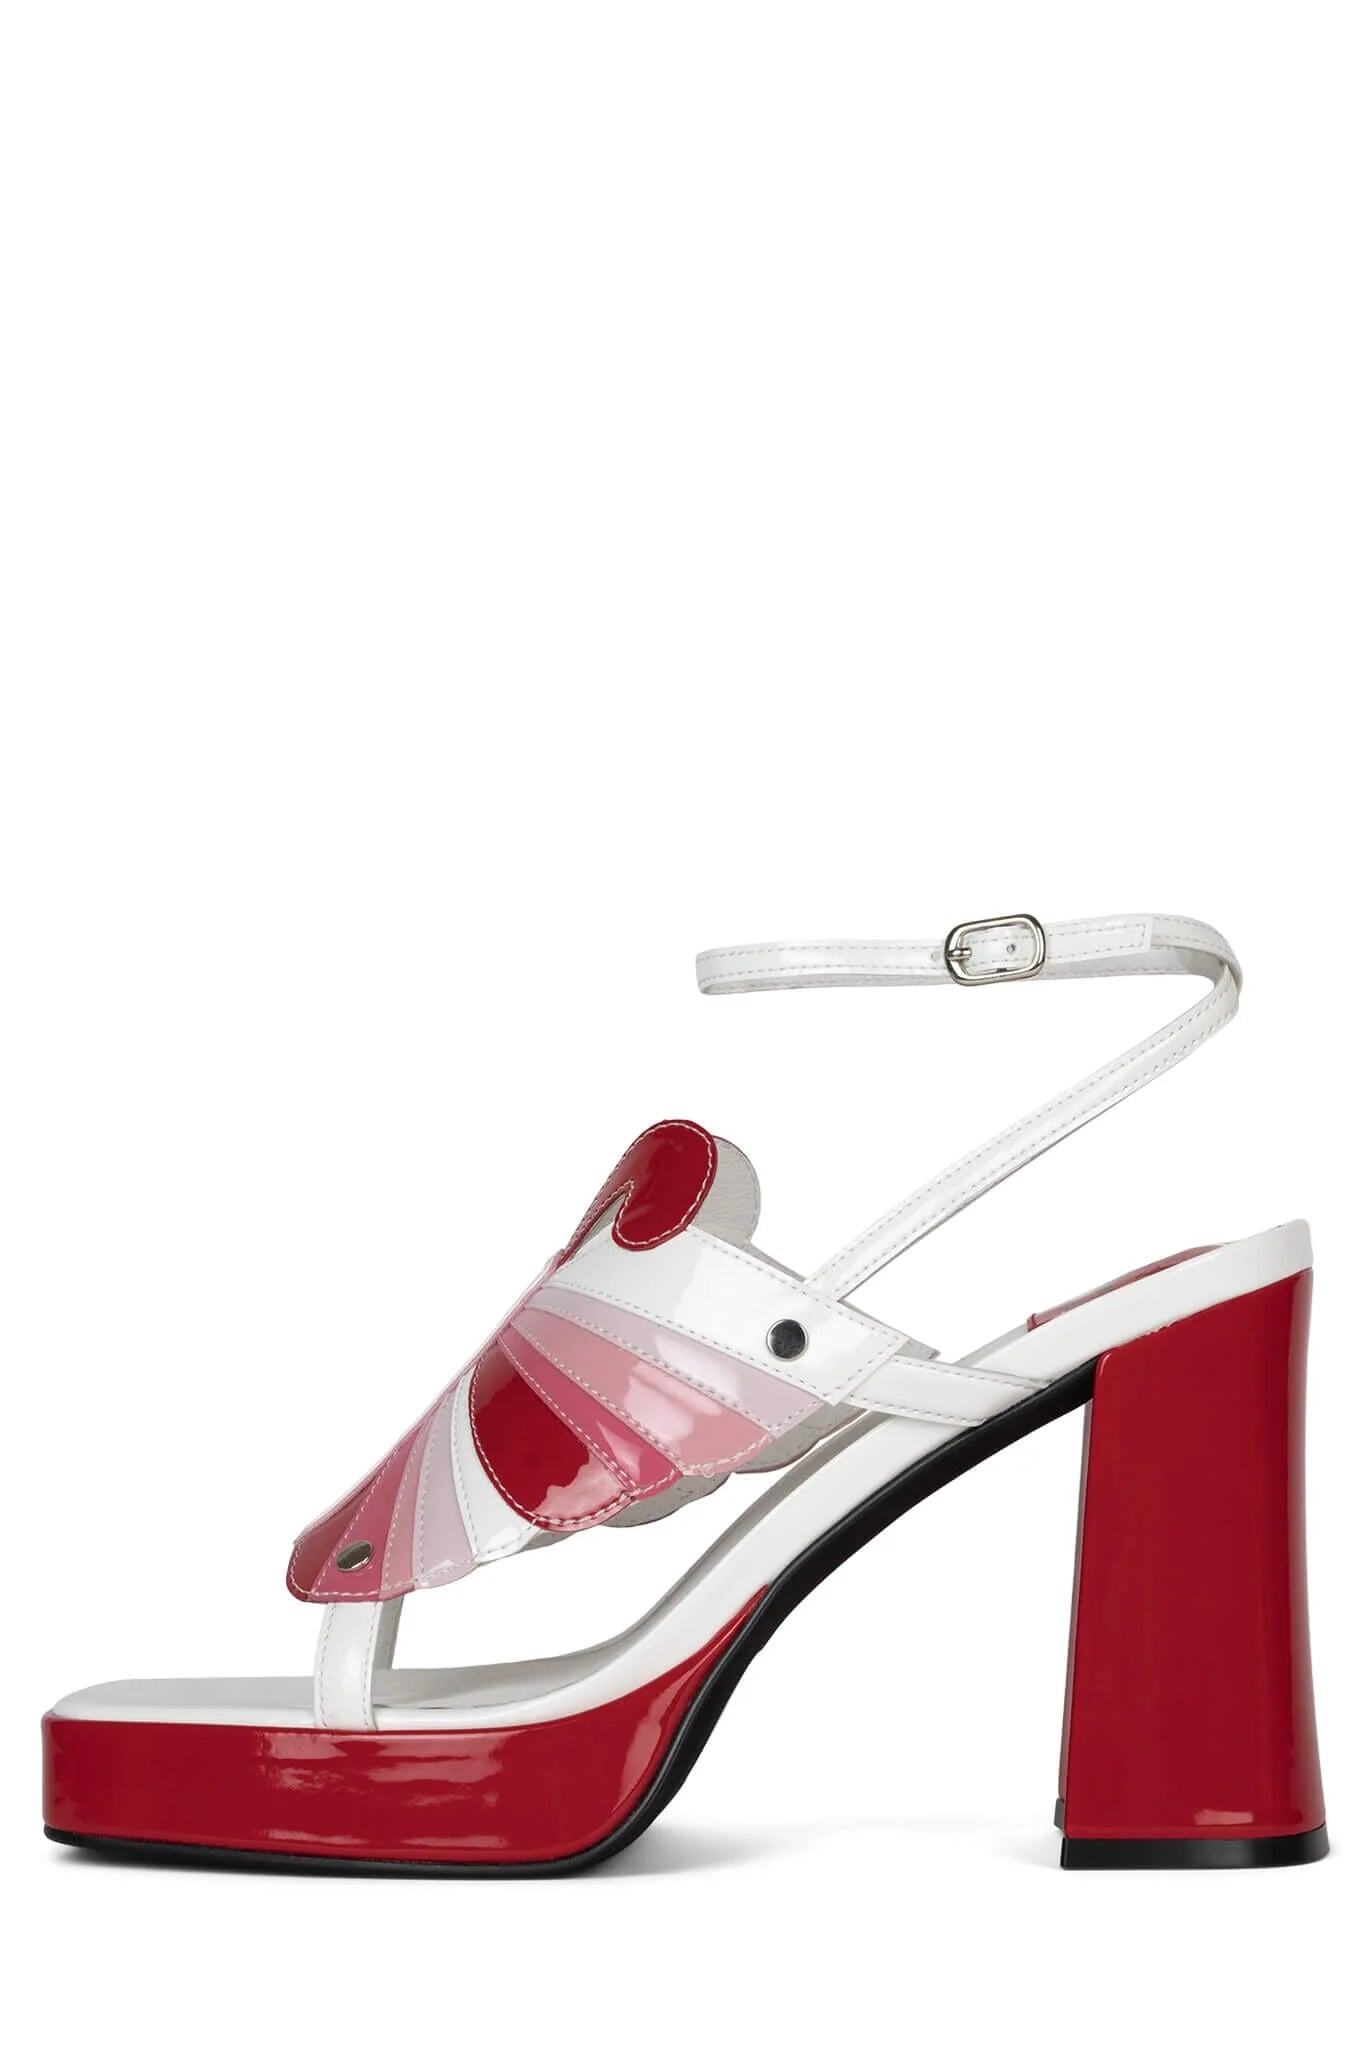 MONARCH L RED PATENT